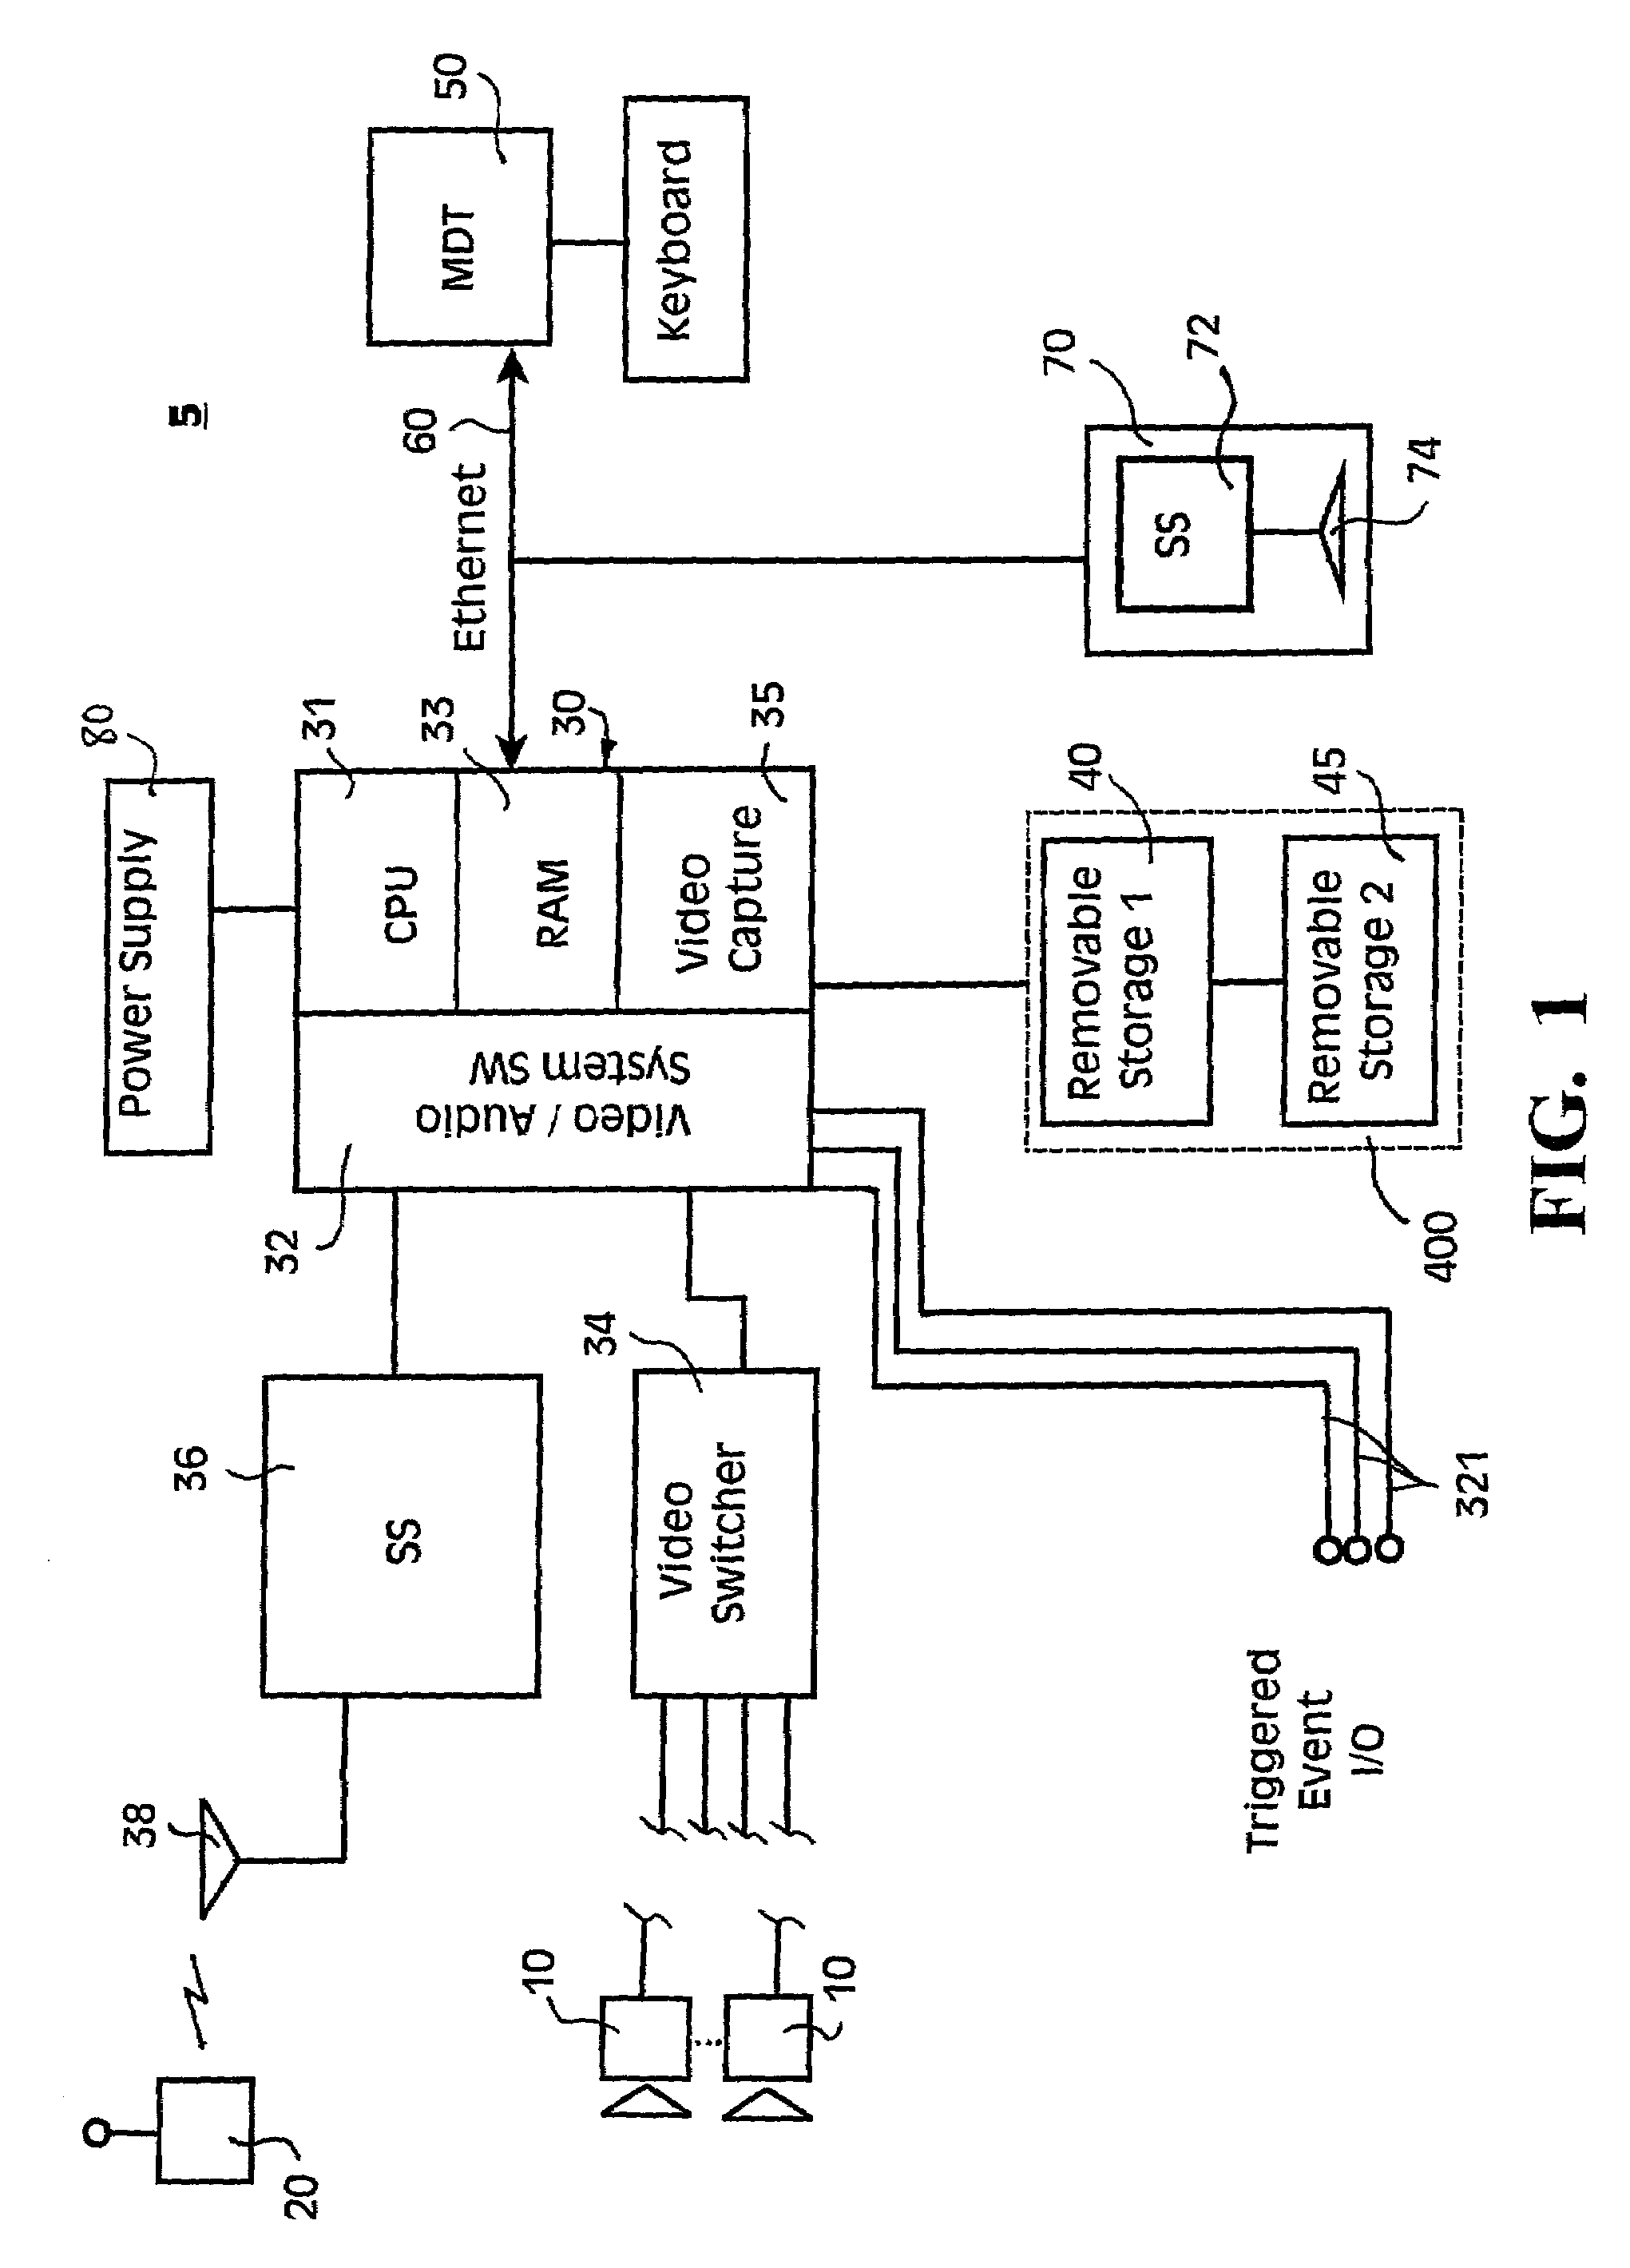 Integrated video data capture system